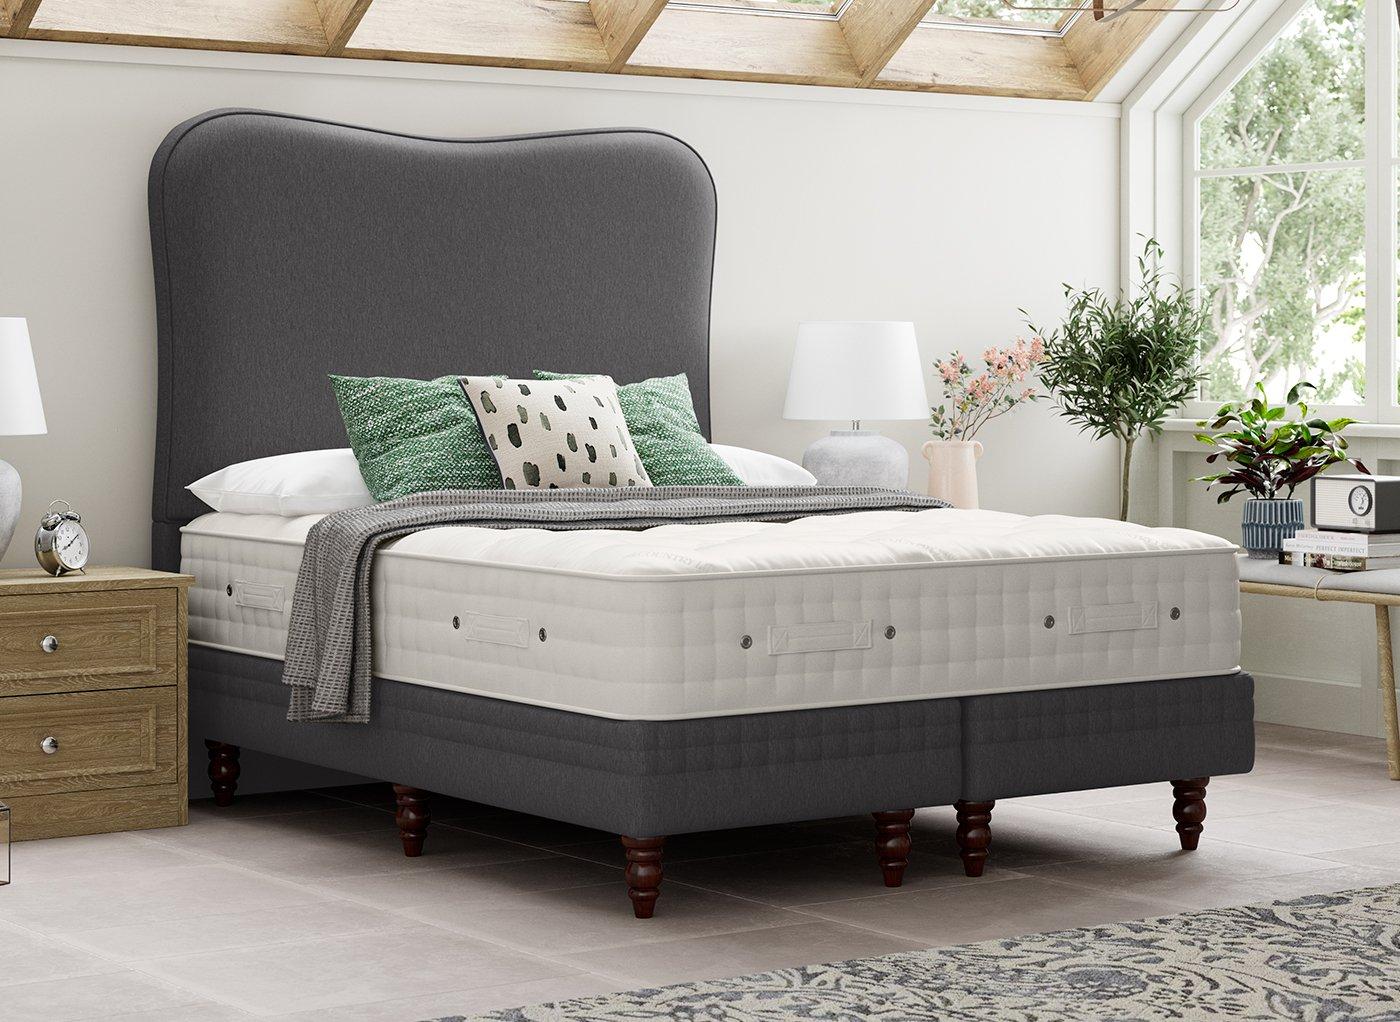 Country Living Thirlmere Divan Bed And Headboard 60 Super King Grey